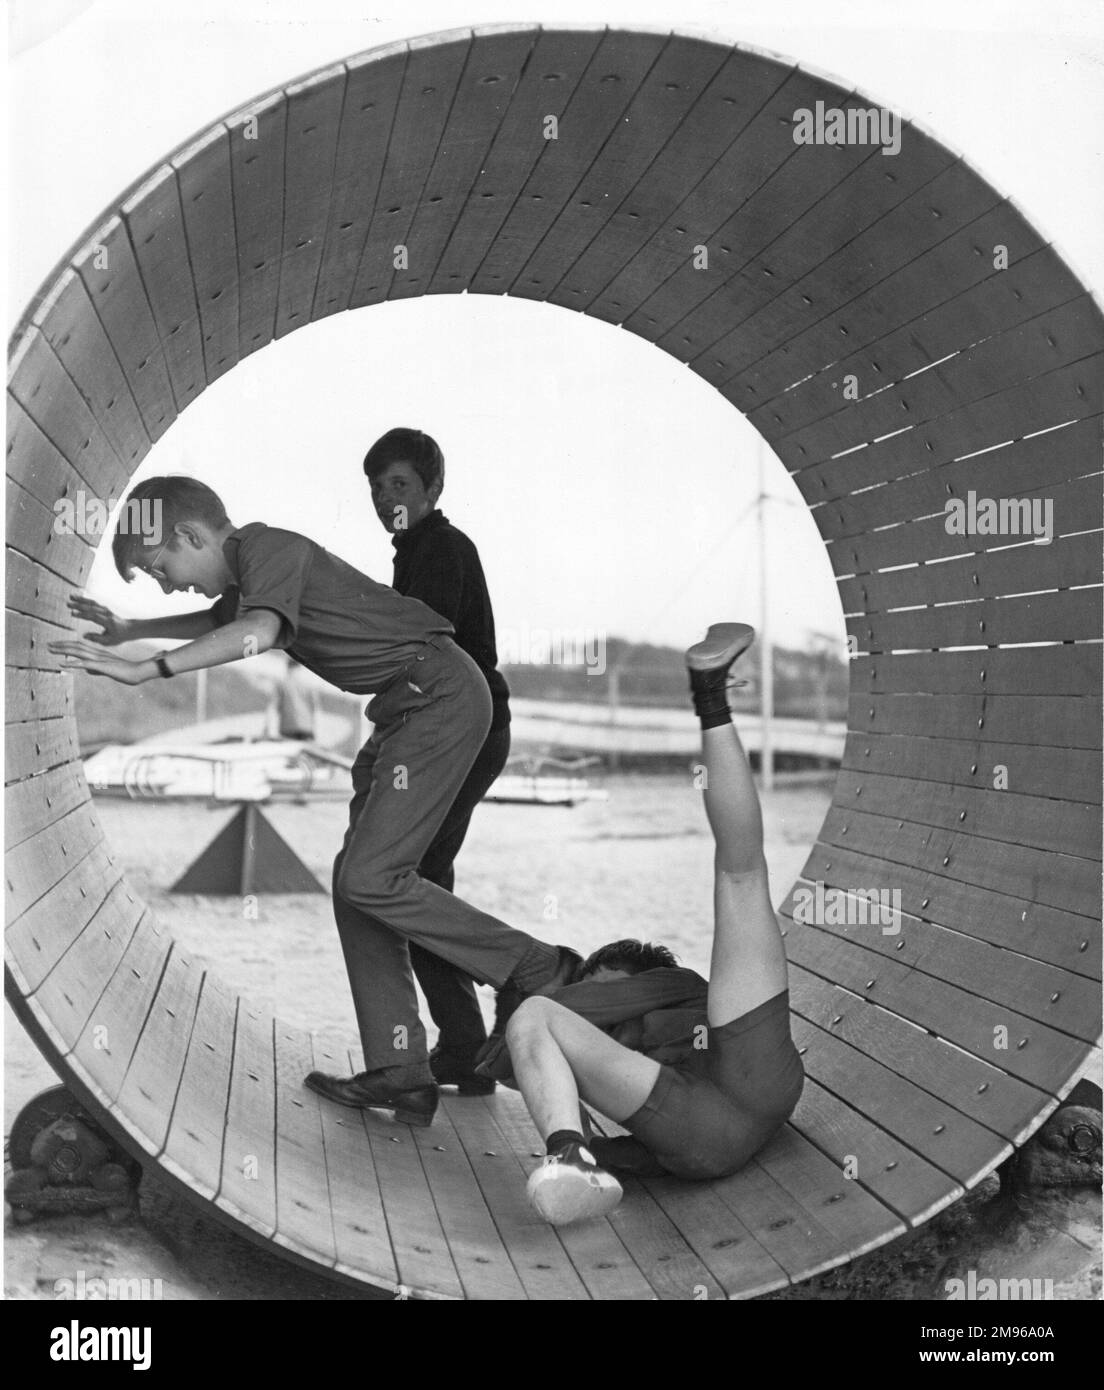 Three boys playing inside a large barrel.  One of them has lost his footing and has fallen over. Stock Photo